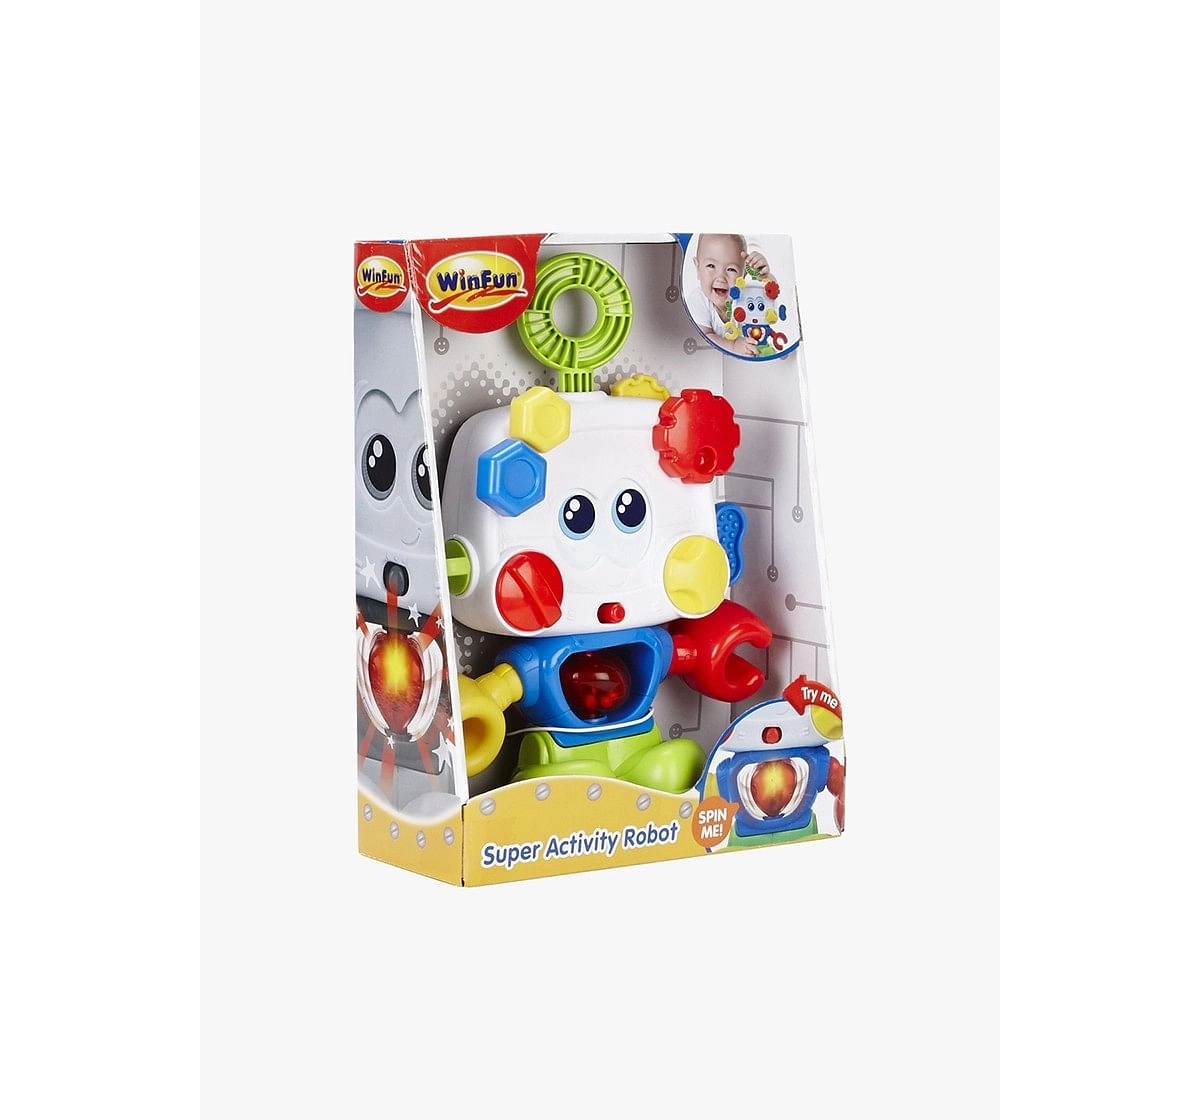 Winfun Super Activity Robot Learning Toys for Kids age 9M+ (White)